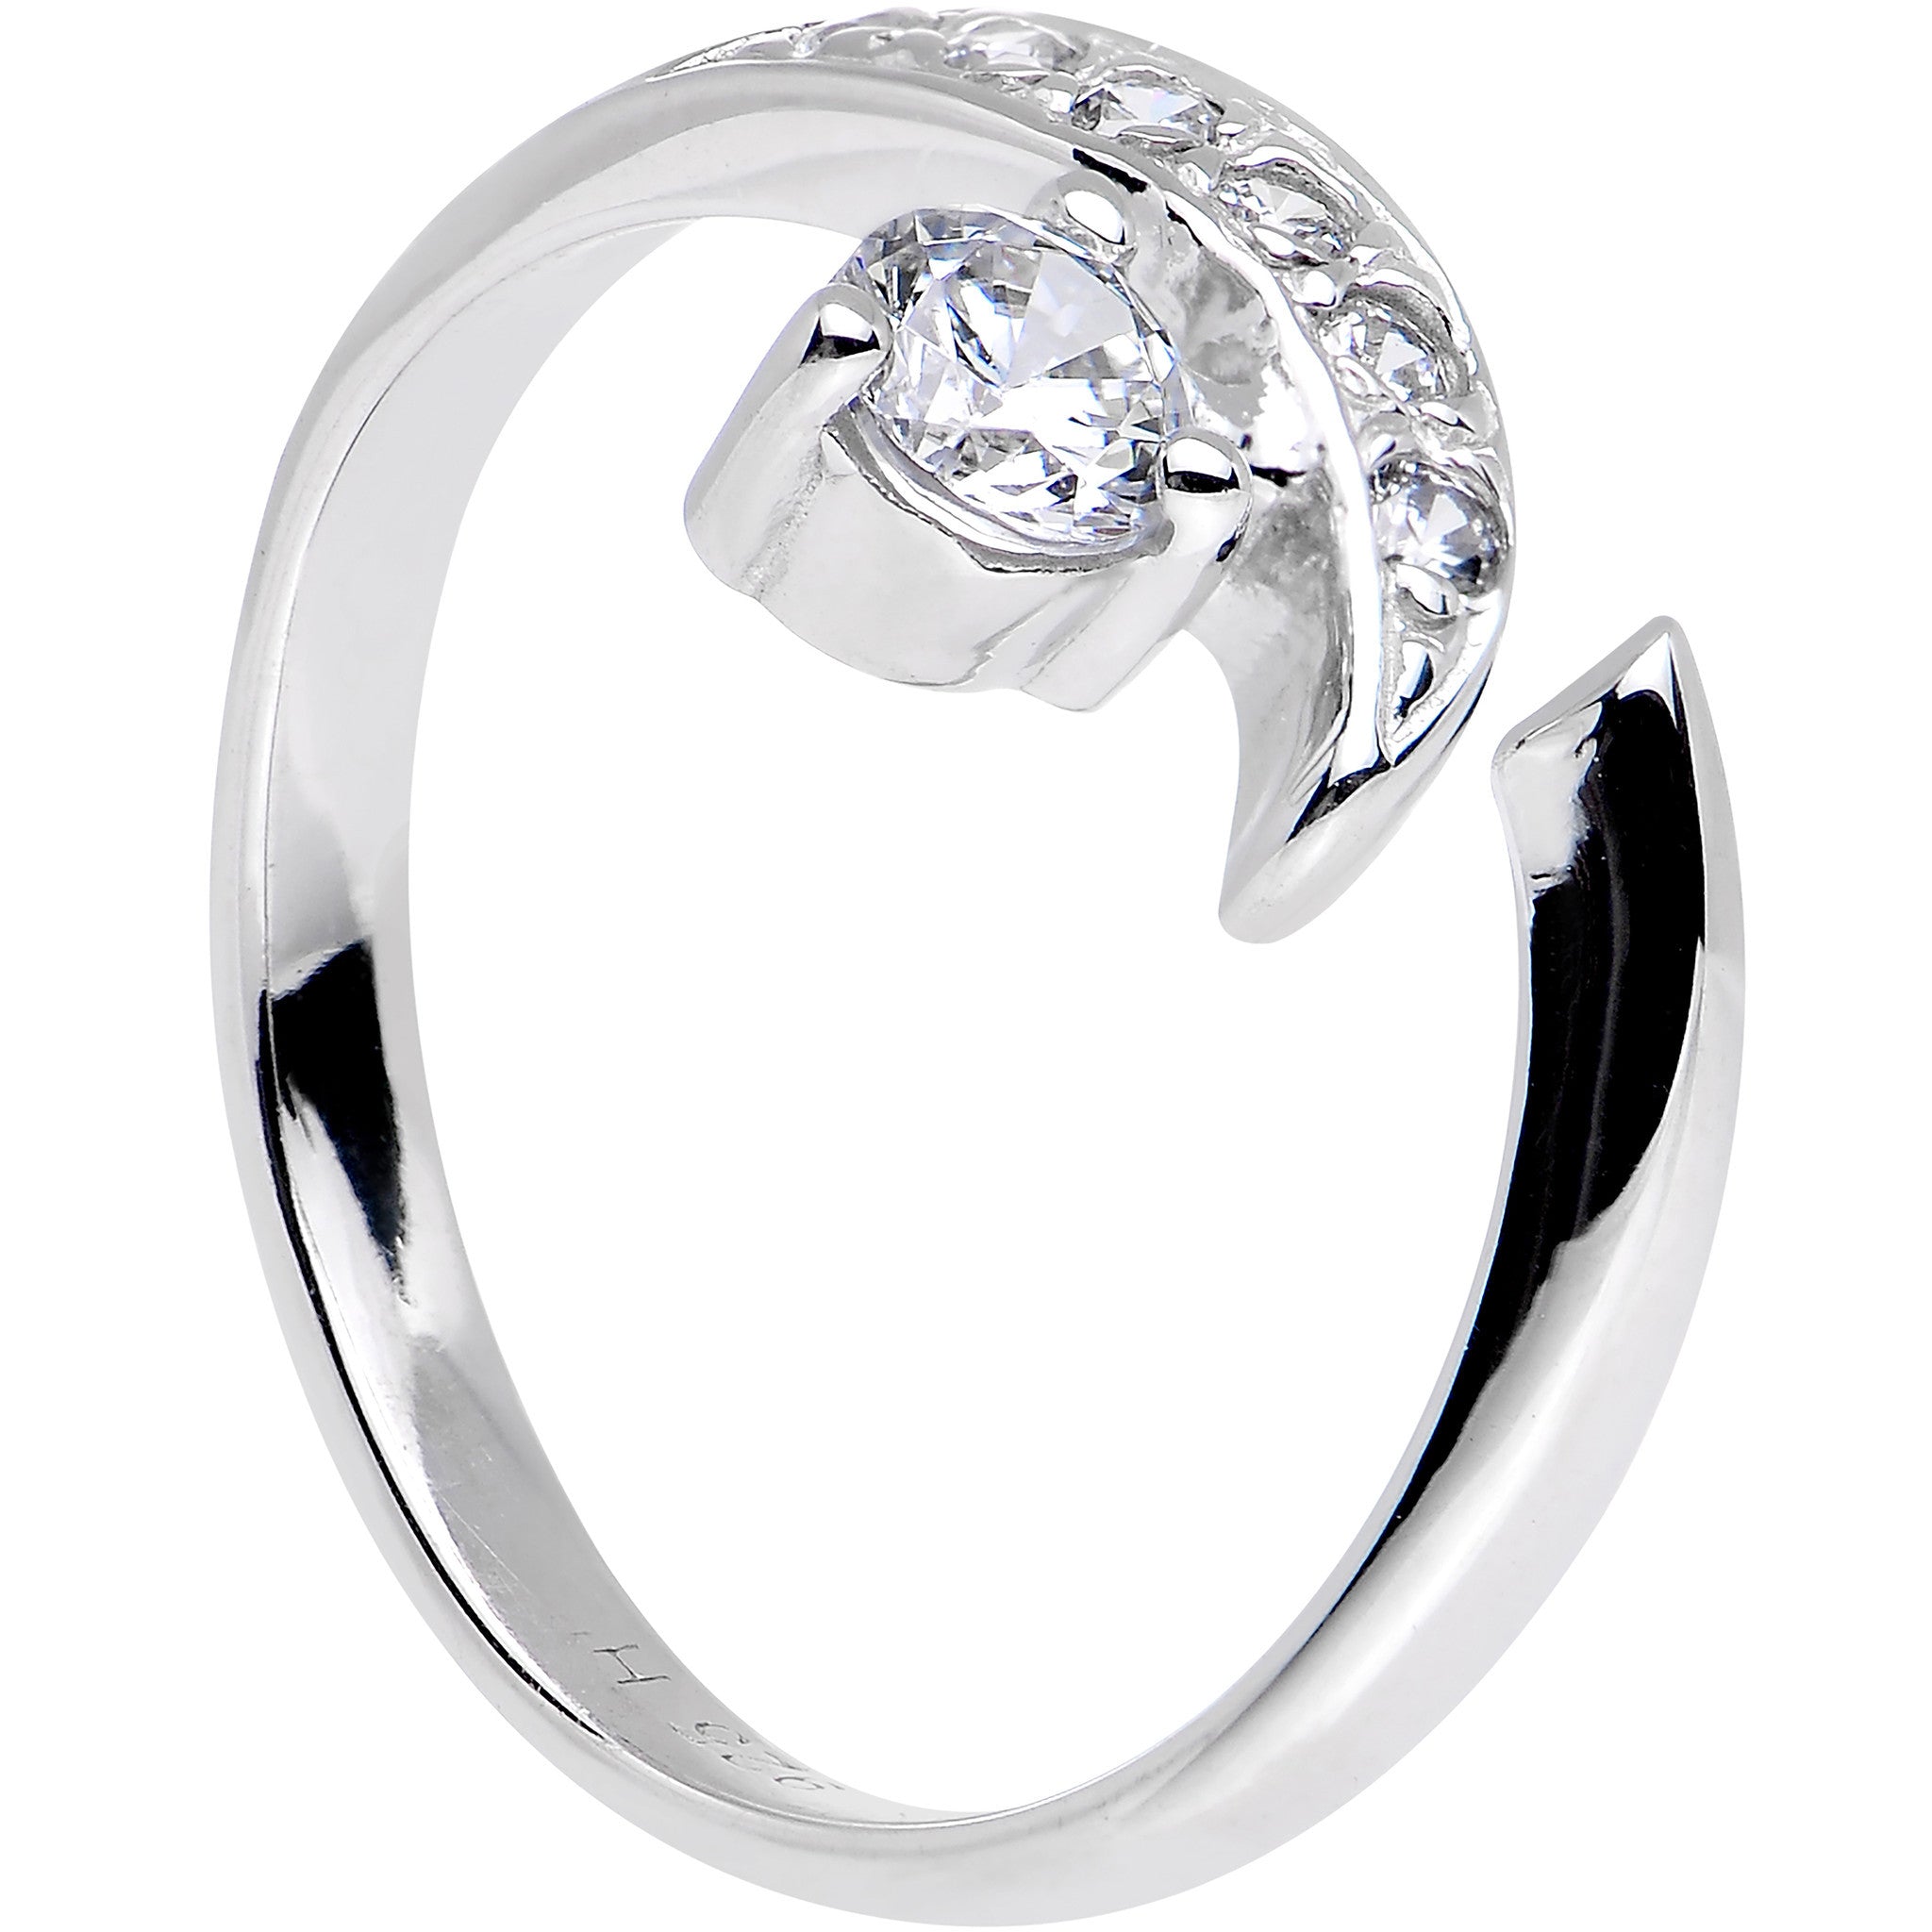 Sterling Silver 925 Cubic Zirconia Solitaire Toe Ring